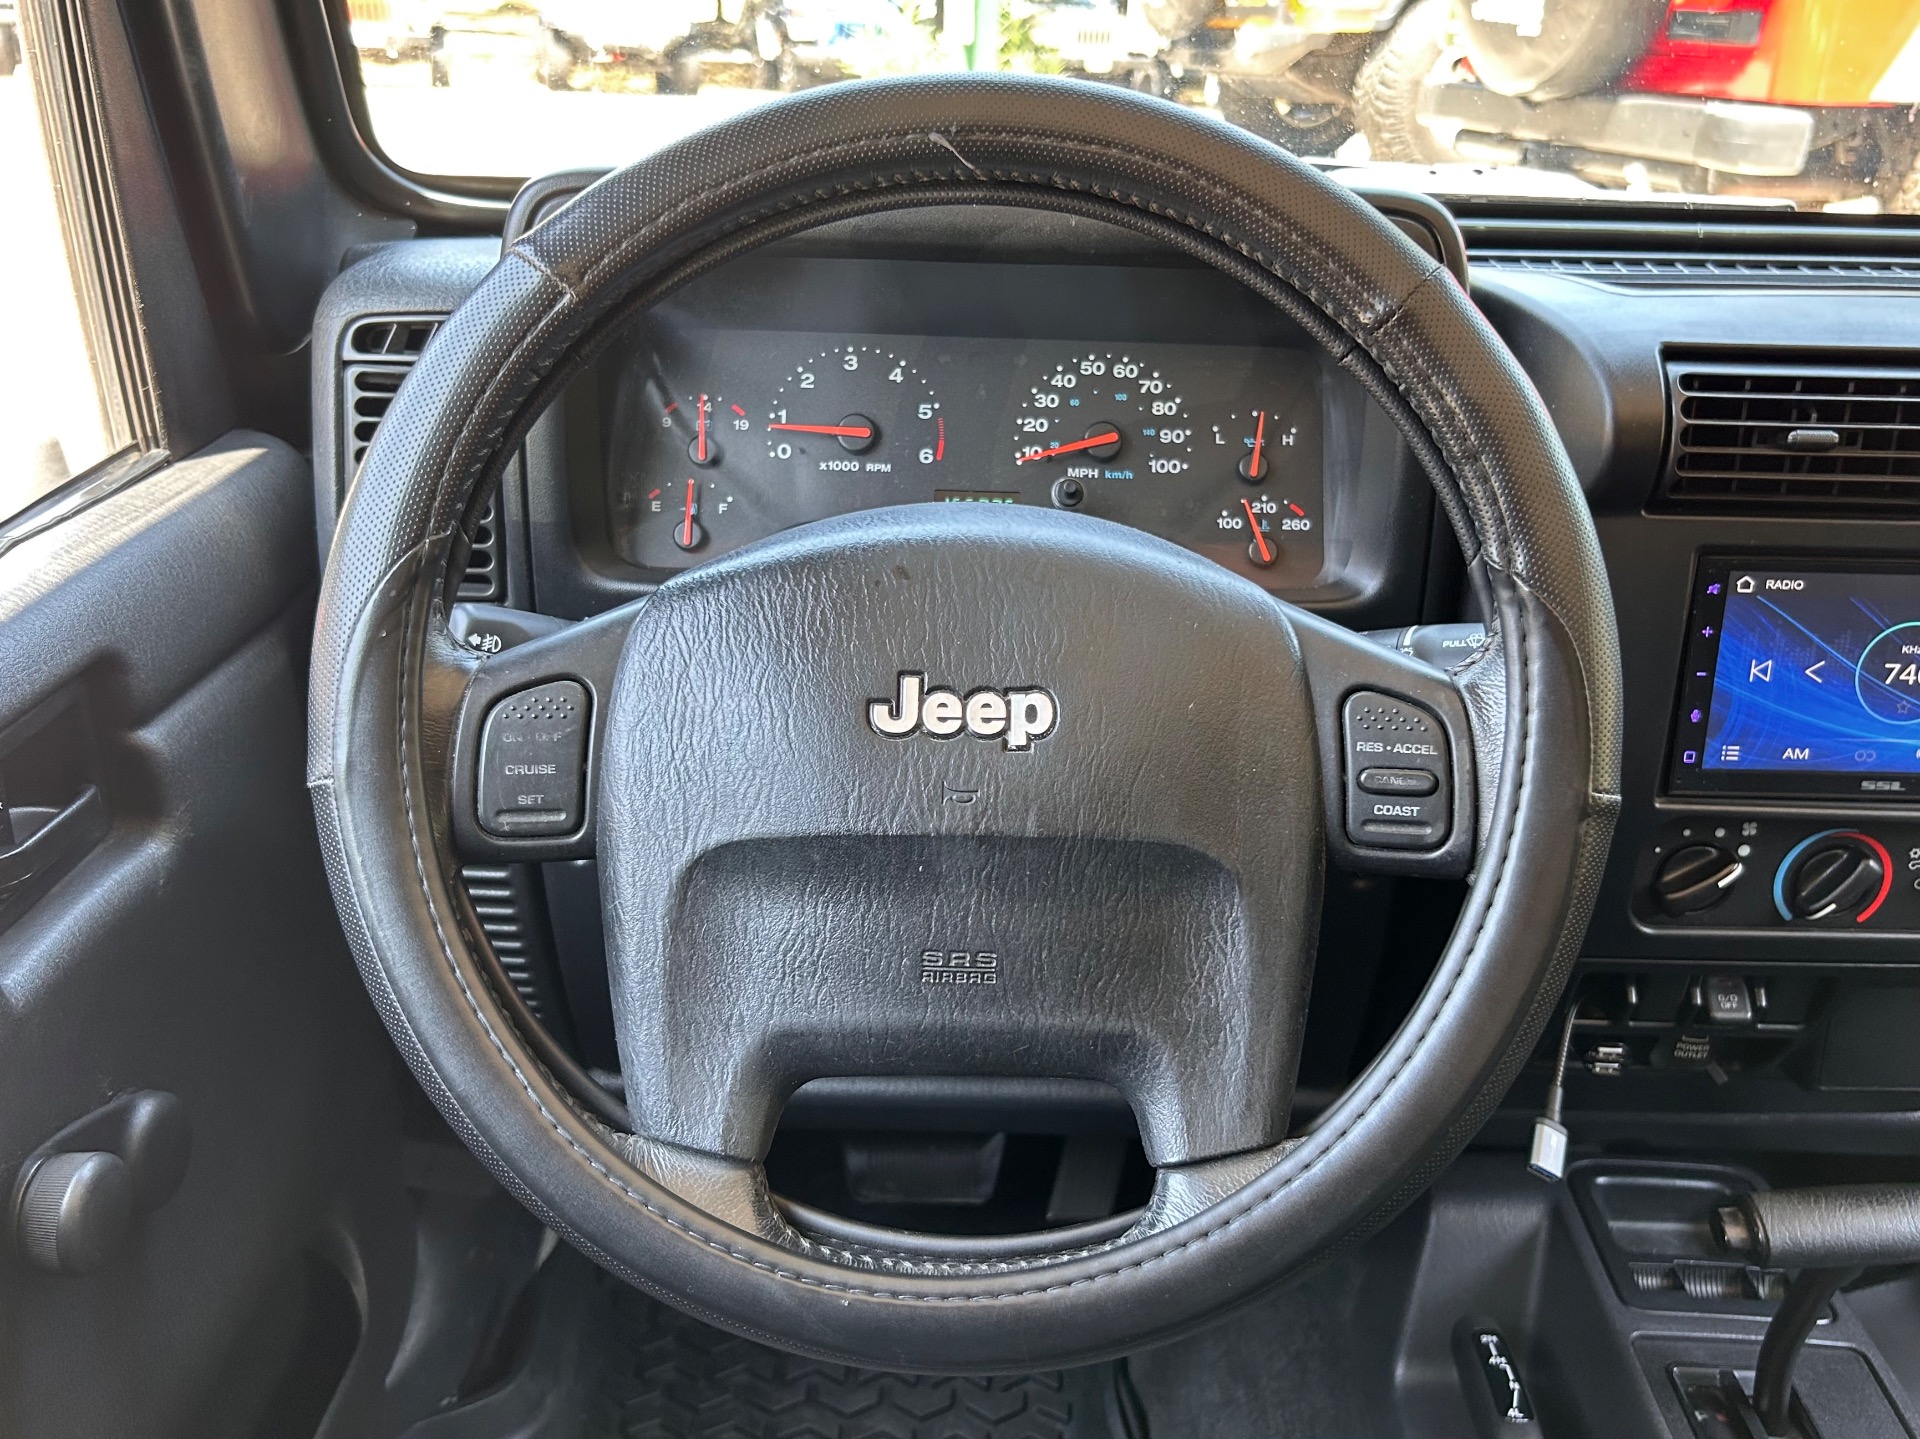 Used-2004-Jeep-Wrangler-Unlimited-Unlimited